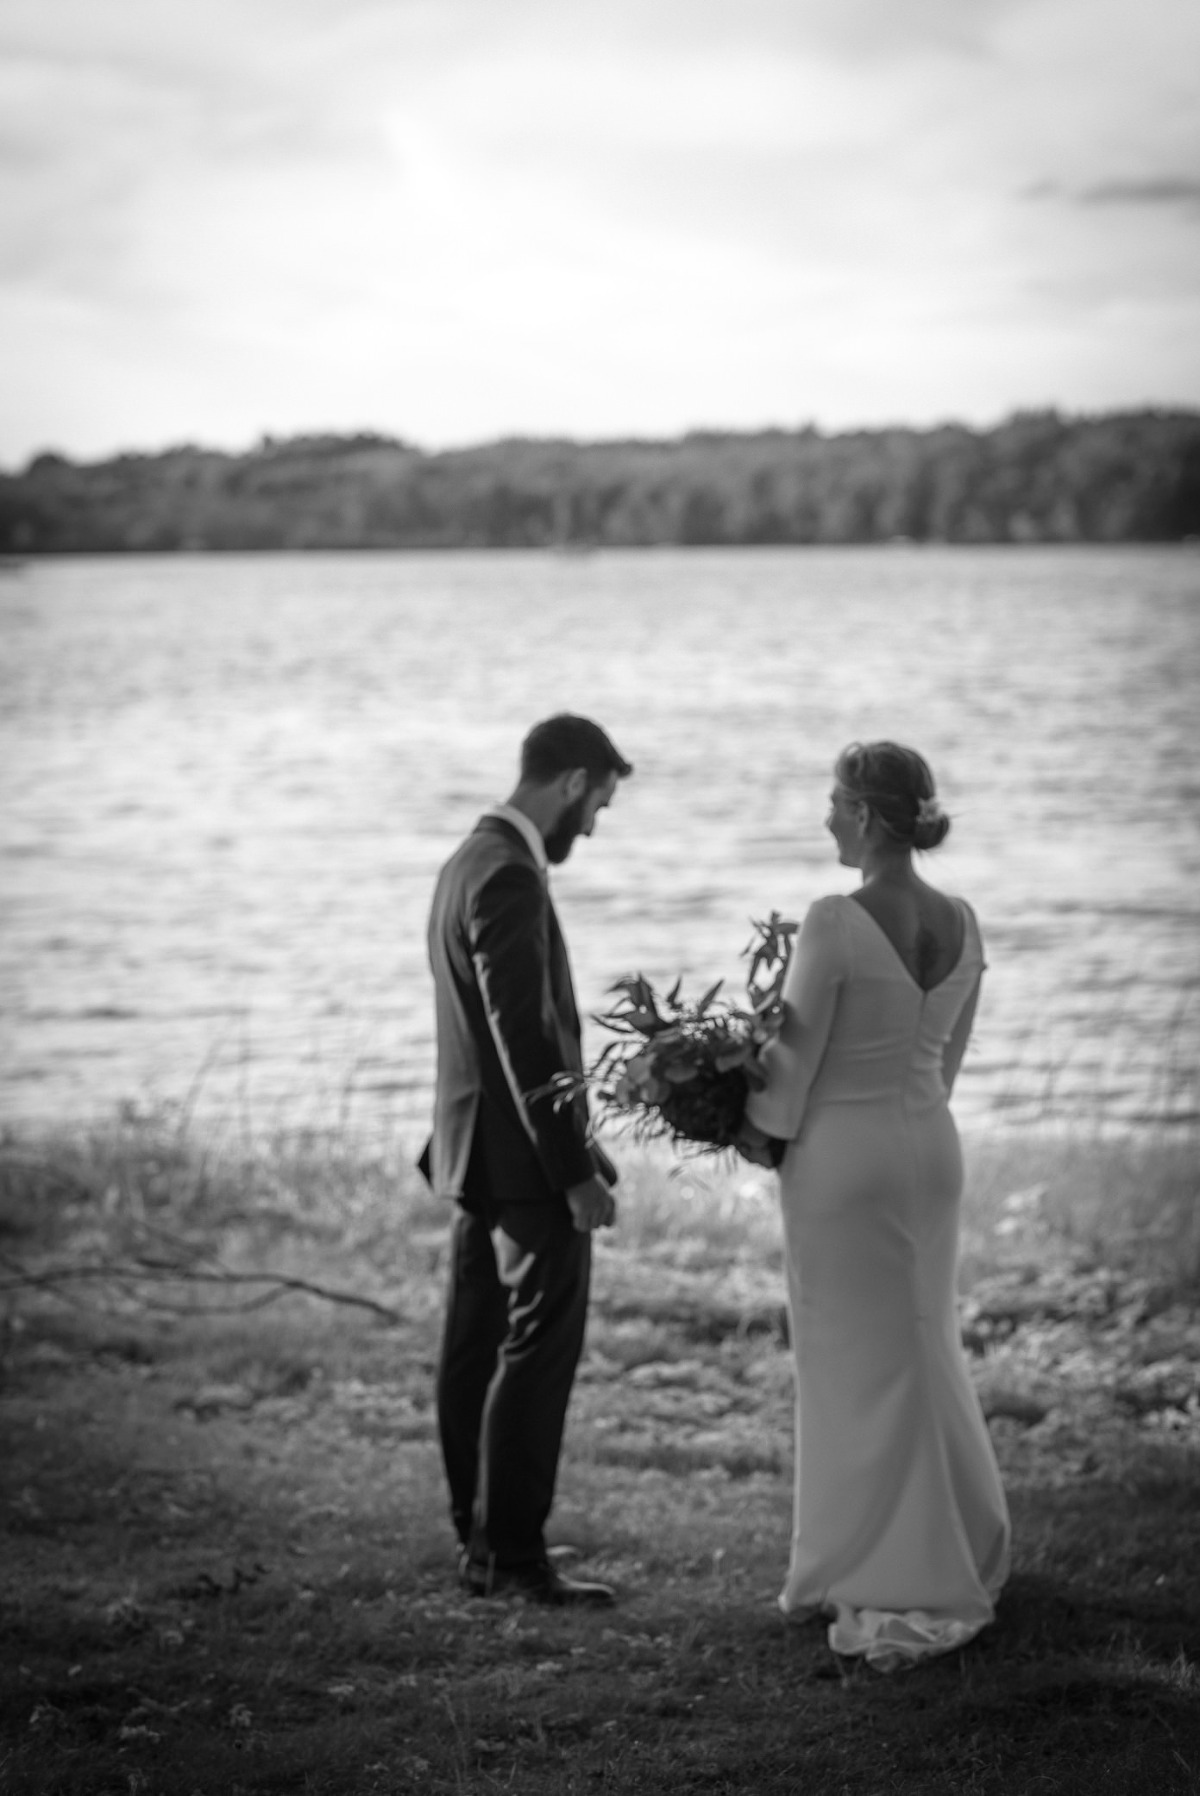 Black and white wedding photo of bride and groom